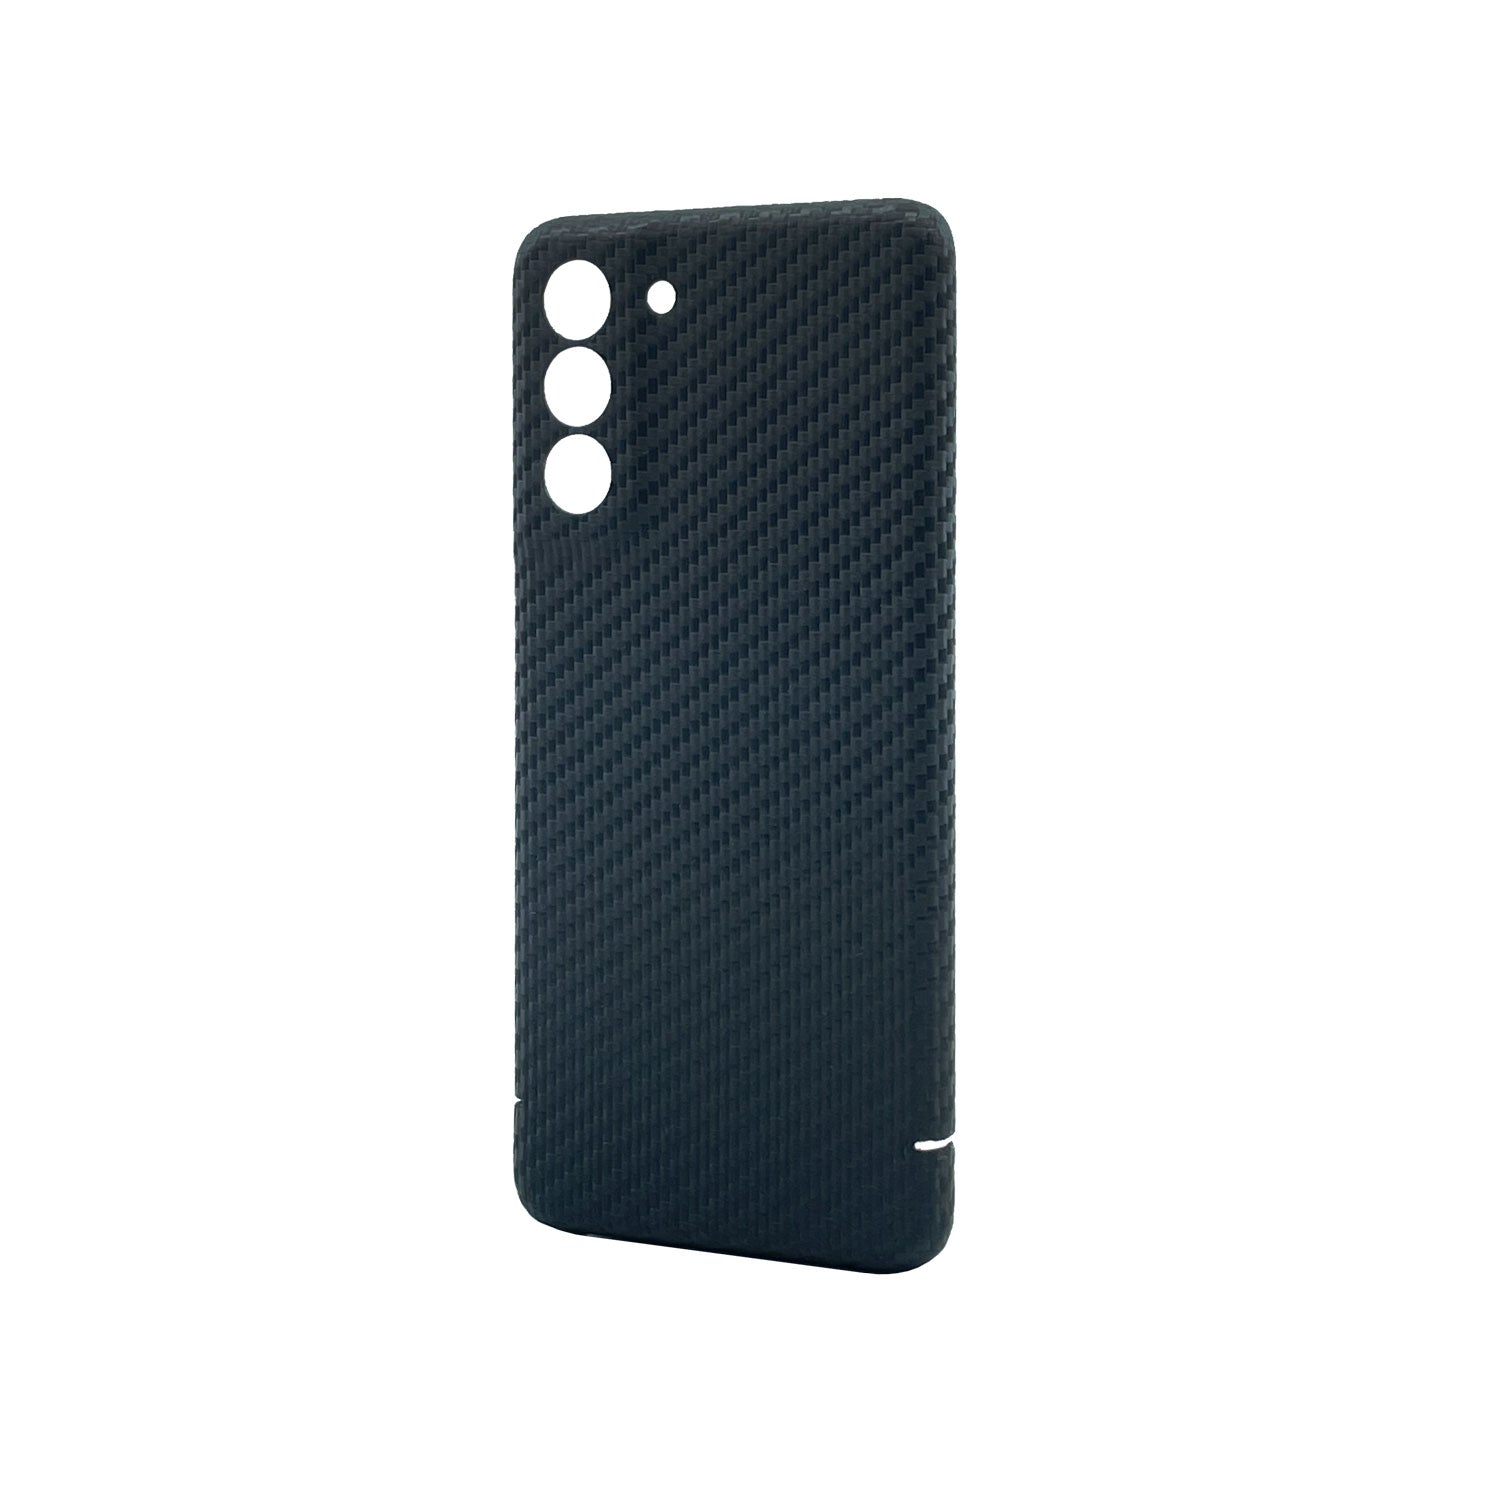 Nevox Carbonseries Cover for Samsung Galaxy S23 Magnet Series